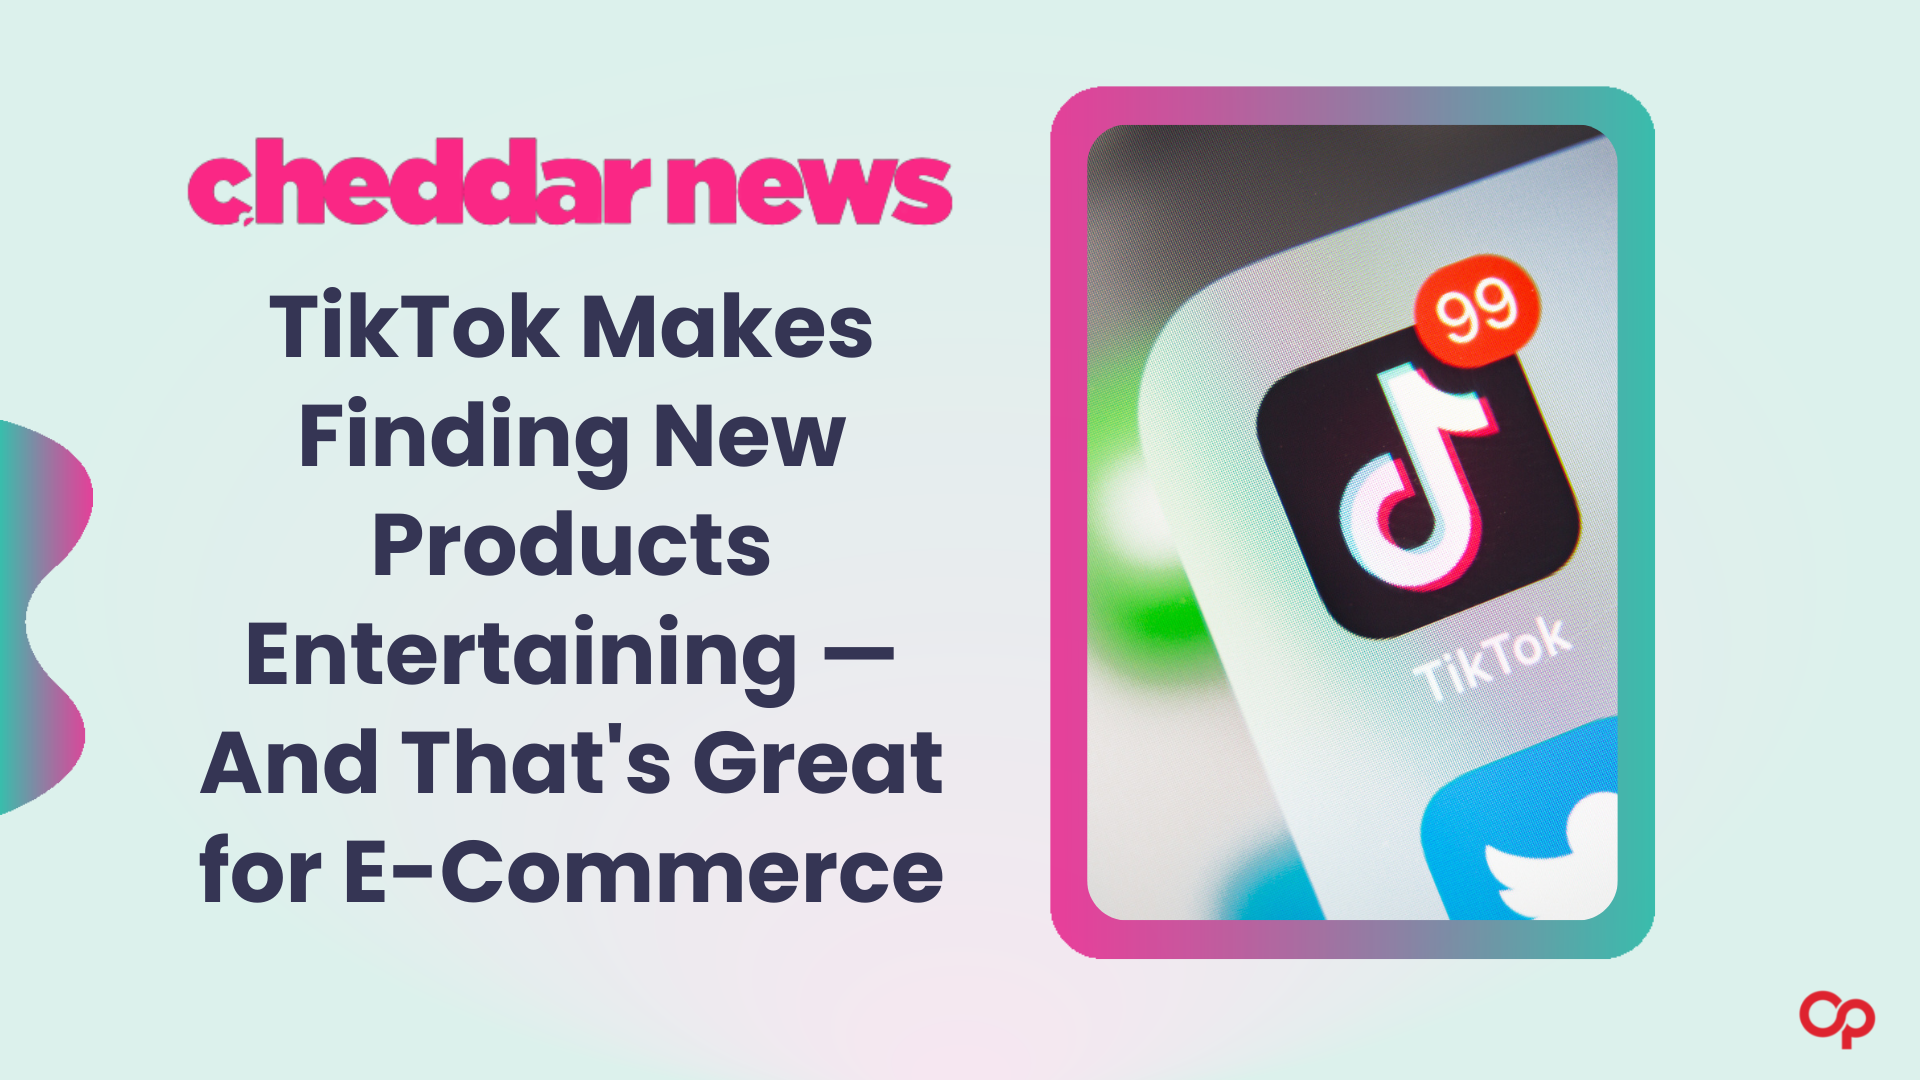 TikTok Makes Finding New Products Entertaining